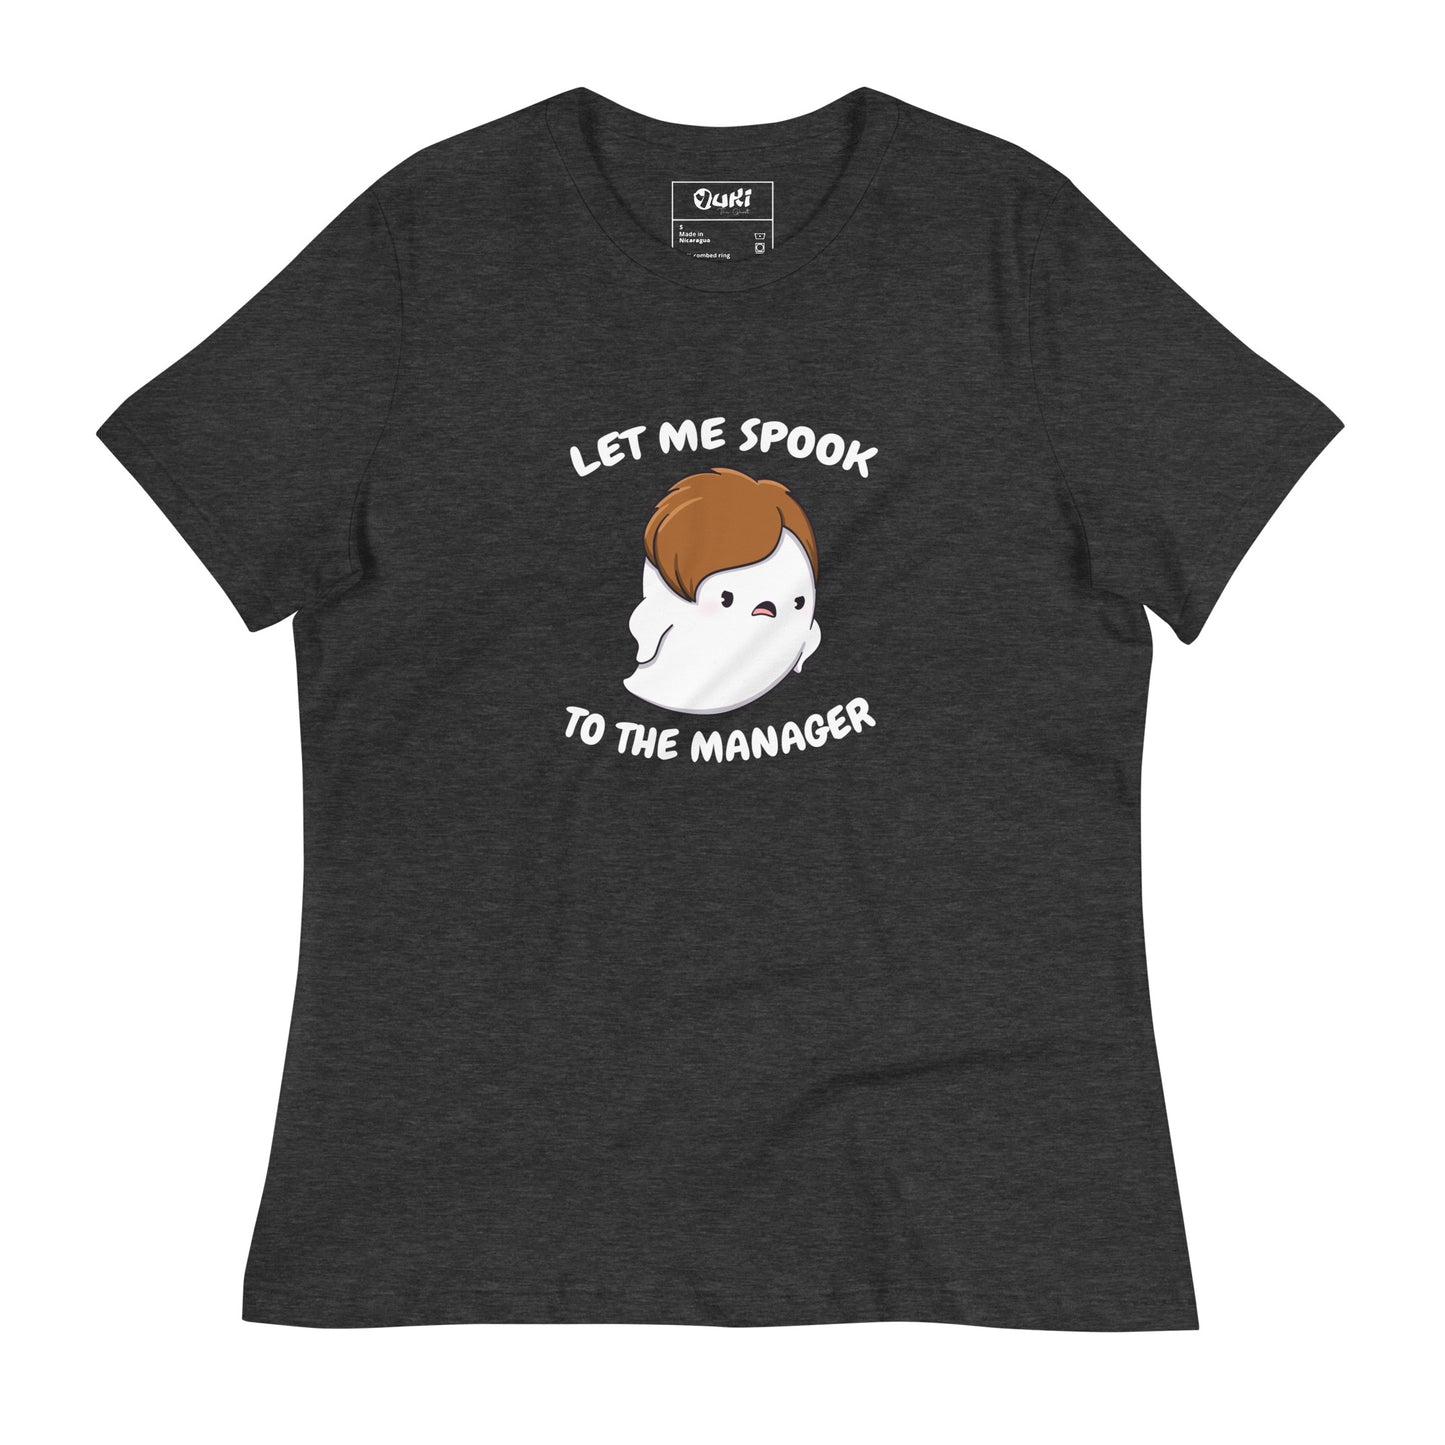 Let me spook to the manager - Women's Relaxed T-Shirt